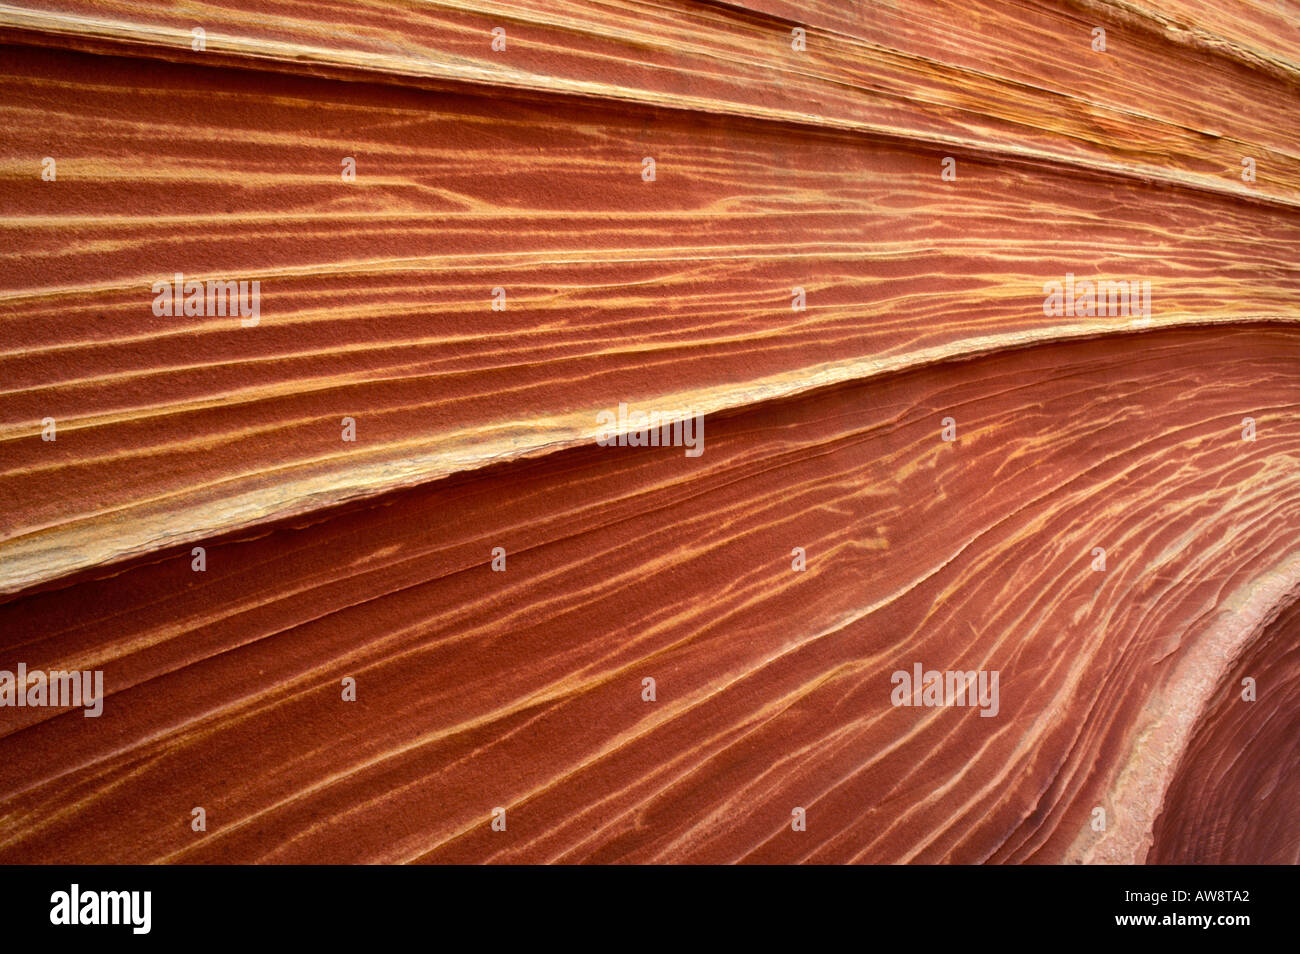 Detail of sandstone formation known as The Wave in the Coyote Buttes area Paria Canyon Vermilion Cliffs Wilderness Arizona Stock Photo